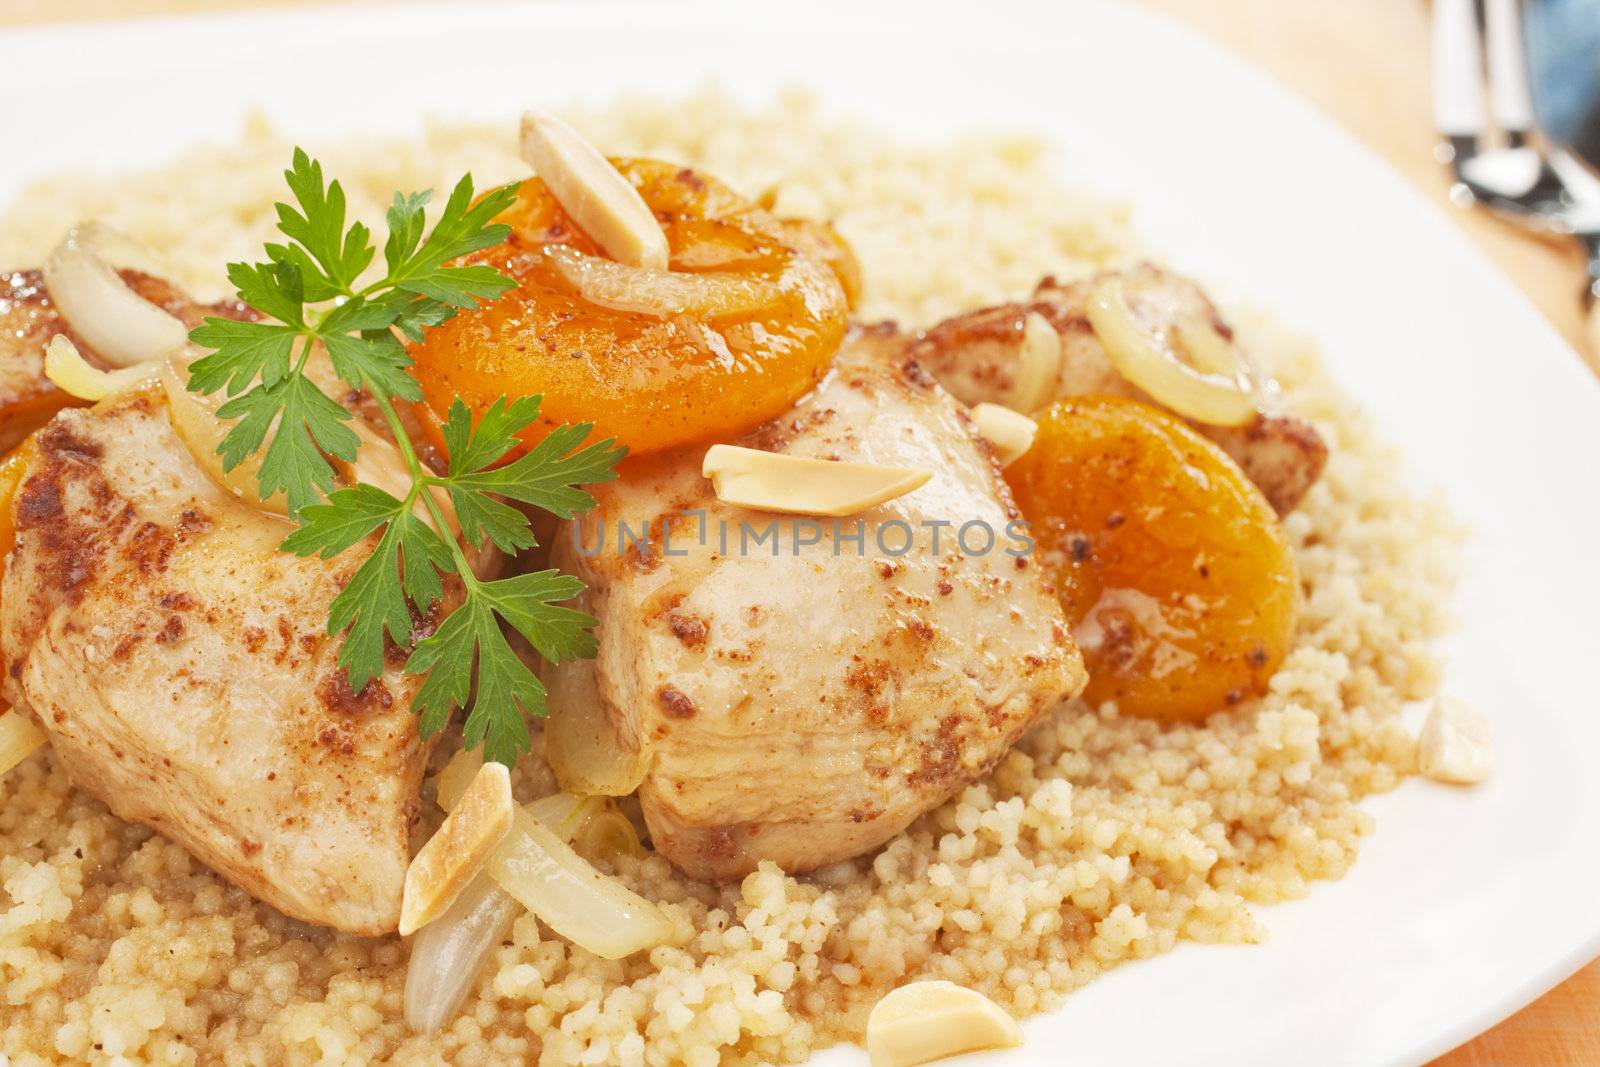 Stew Chicken Apricot Tagine with Couscous by Travelling-light